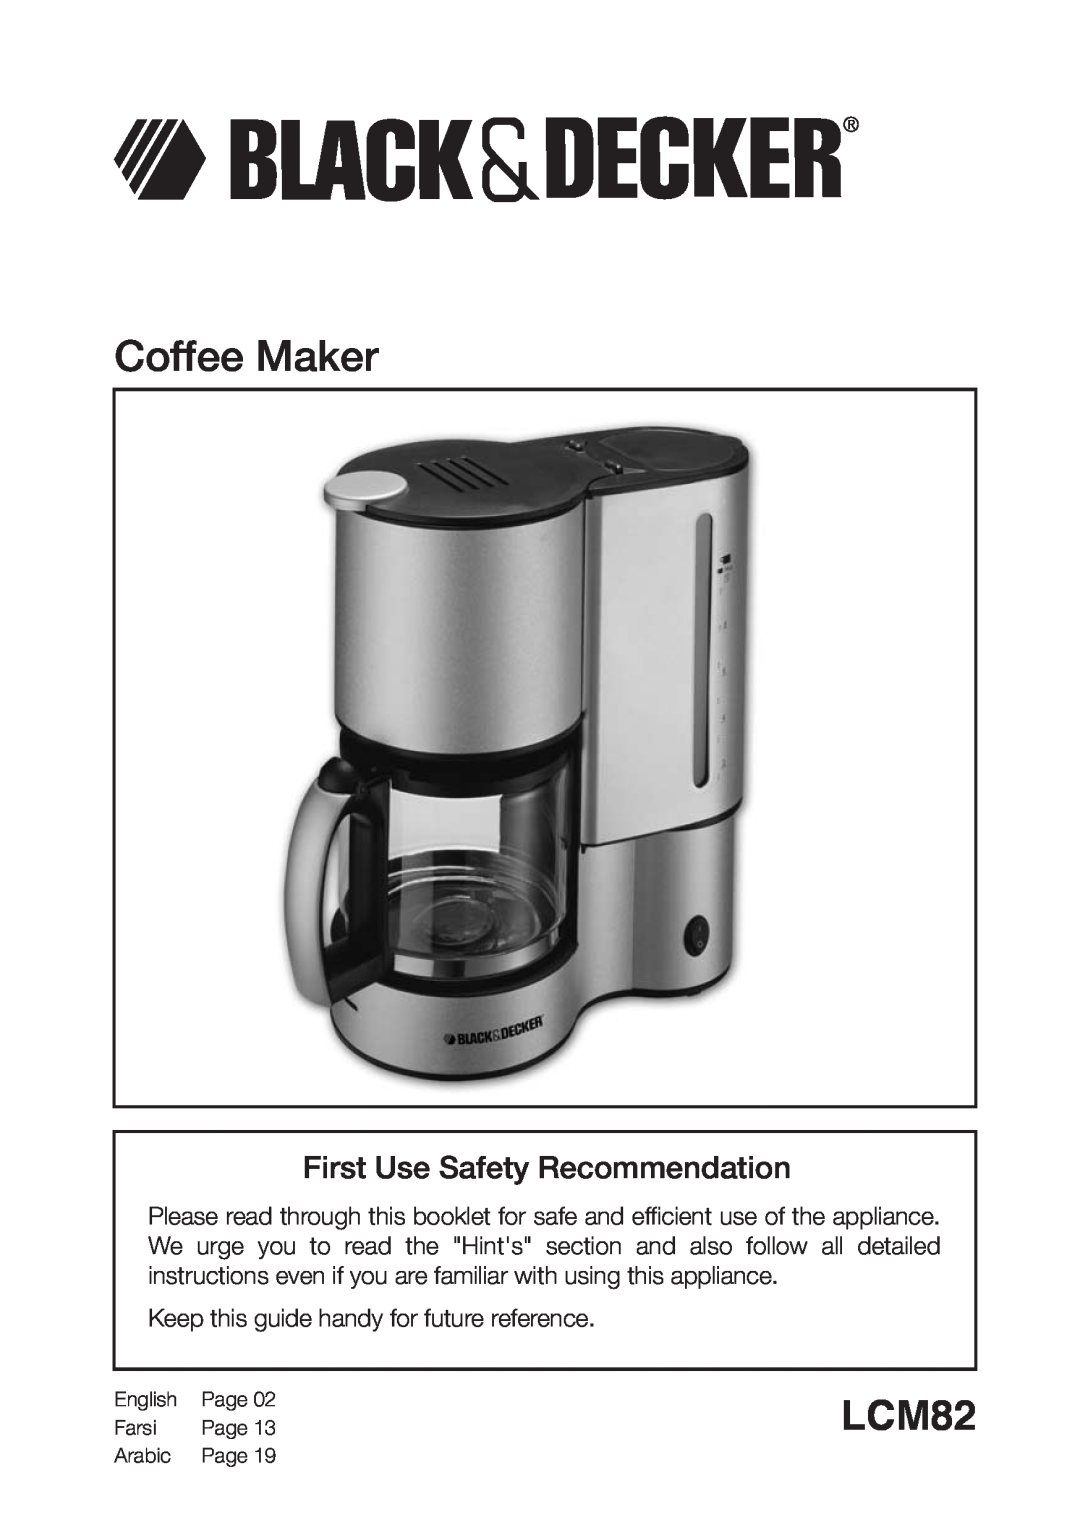 Black & Decker LCM82 manual First Use Safety Recommendation, Coffee Maker 